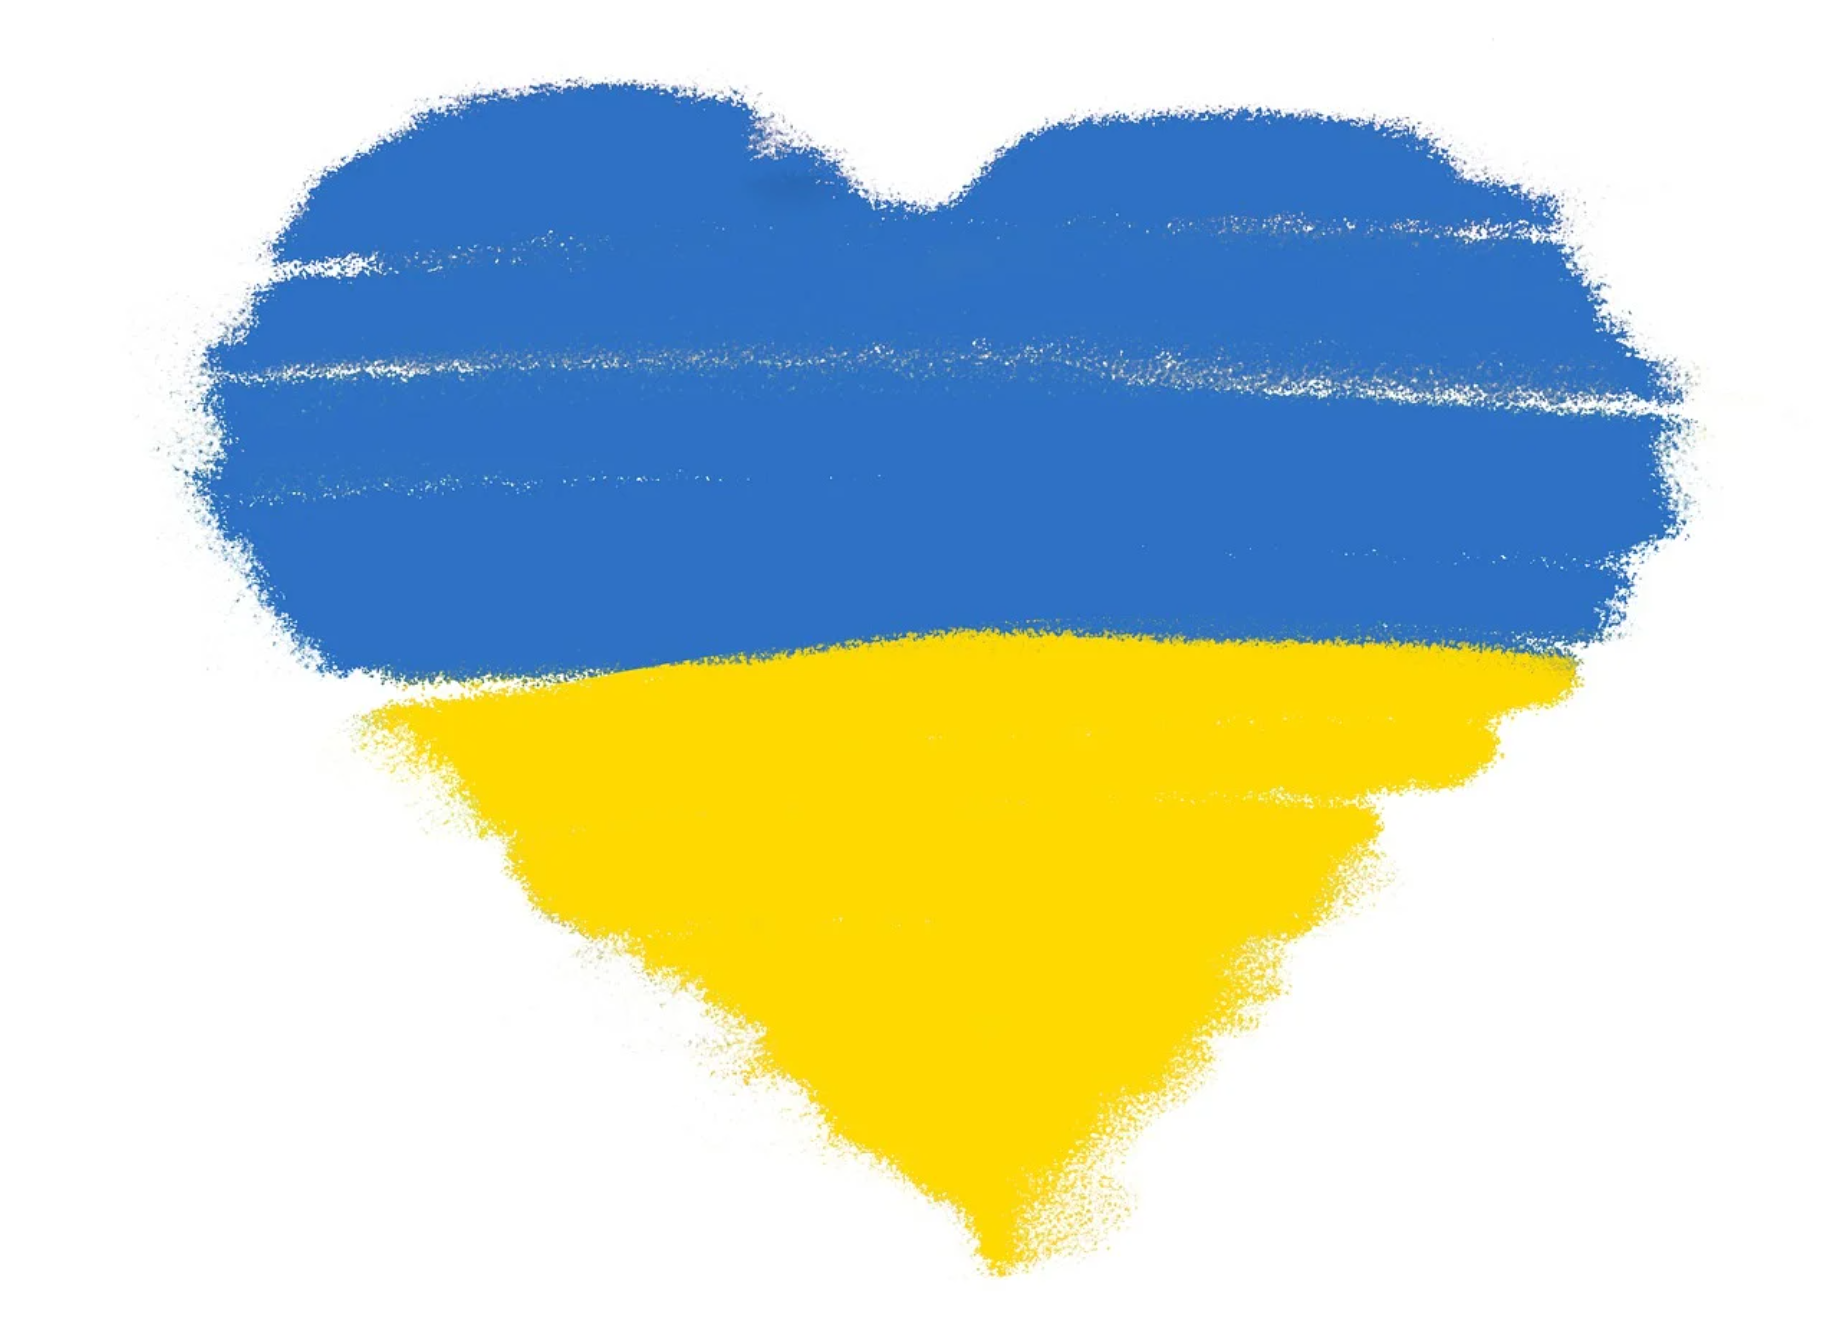 Ukraine flag in the shape of a heart